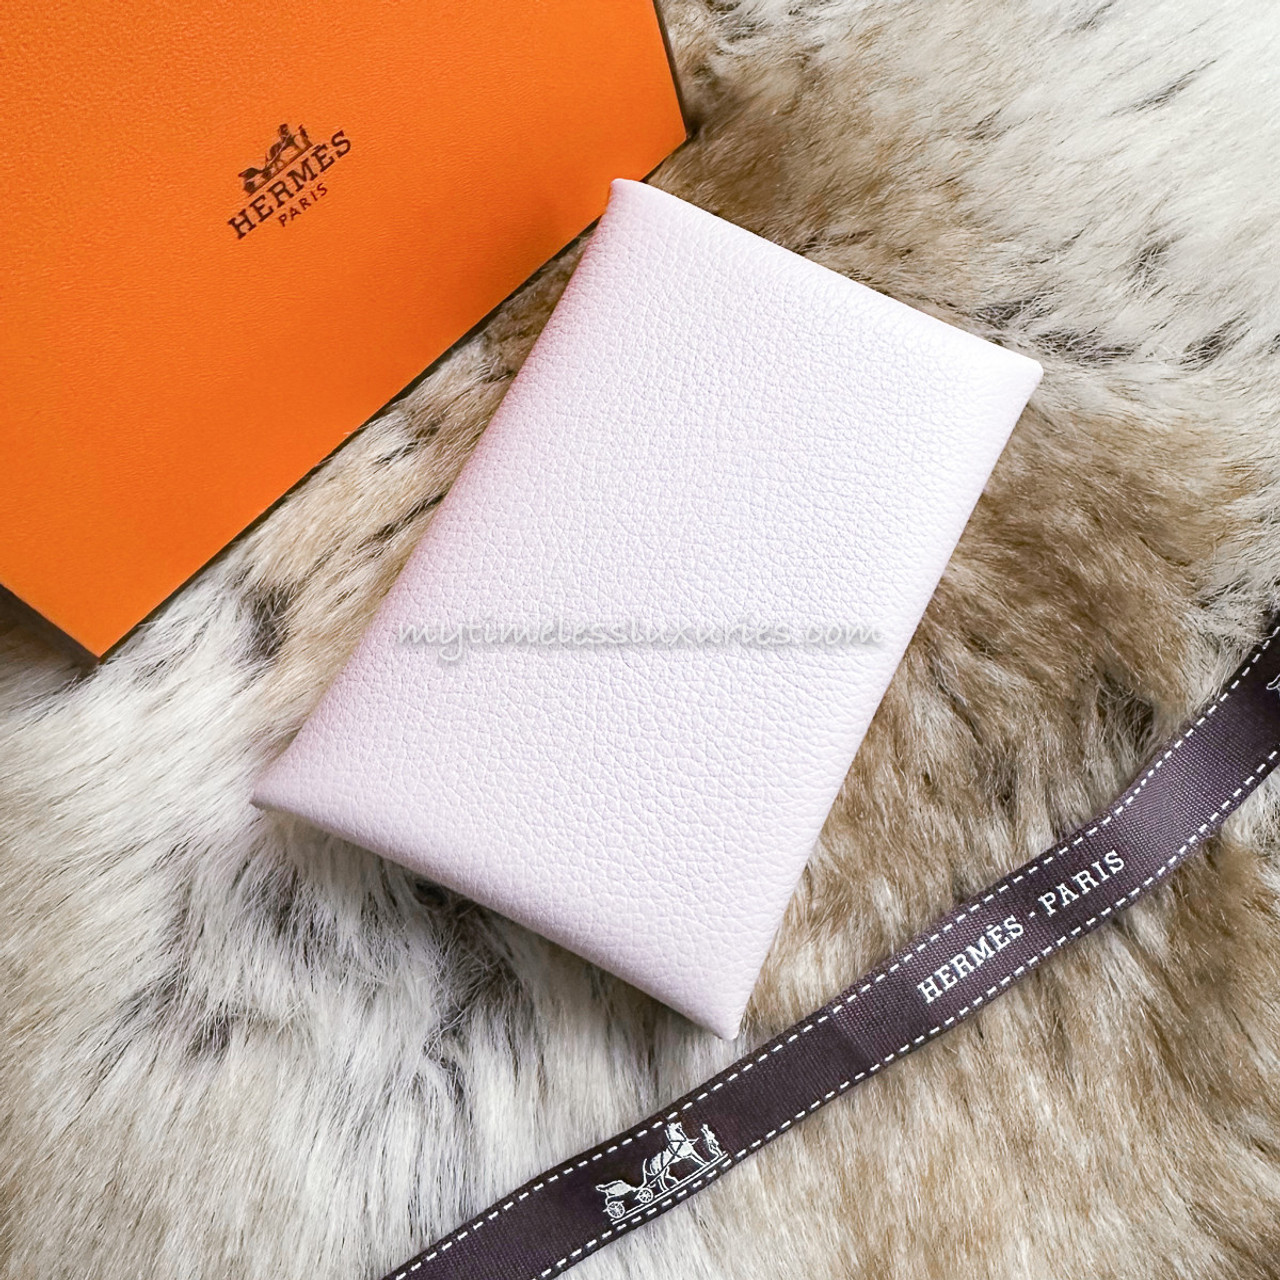 Hermes Calvi Card Holder what is can fit 